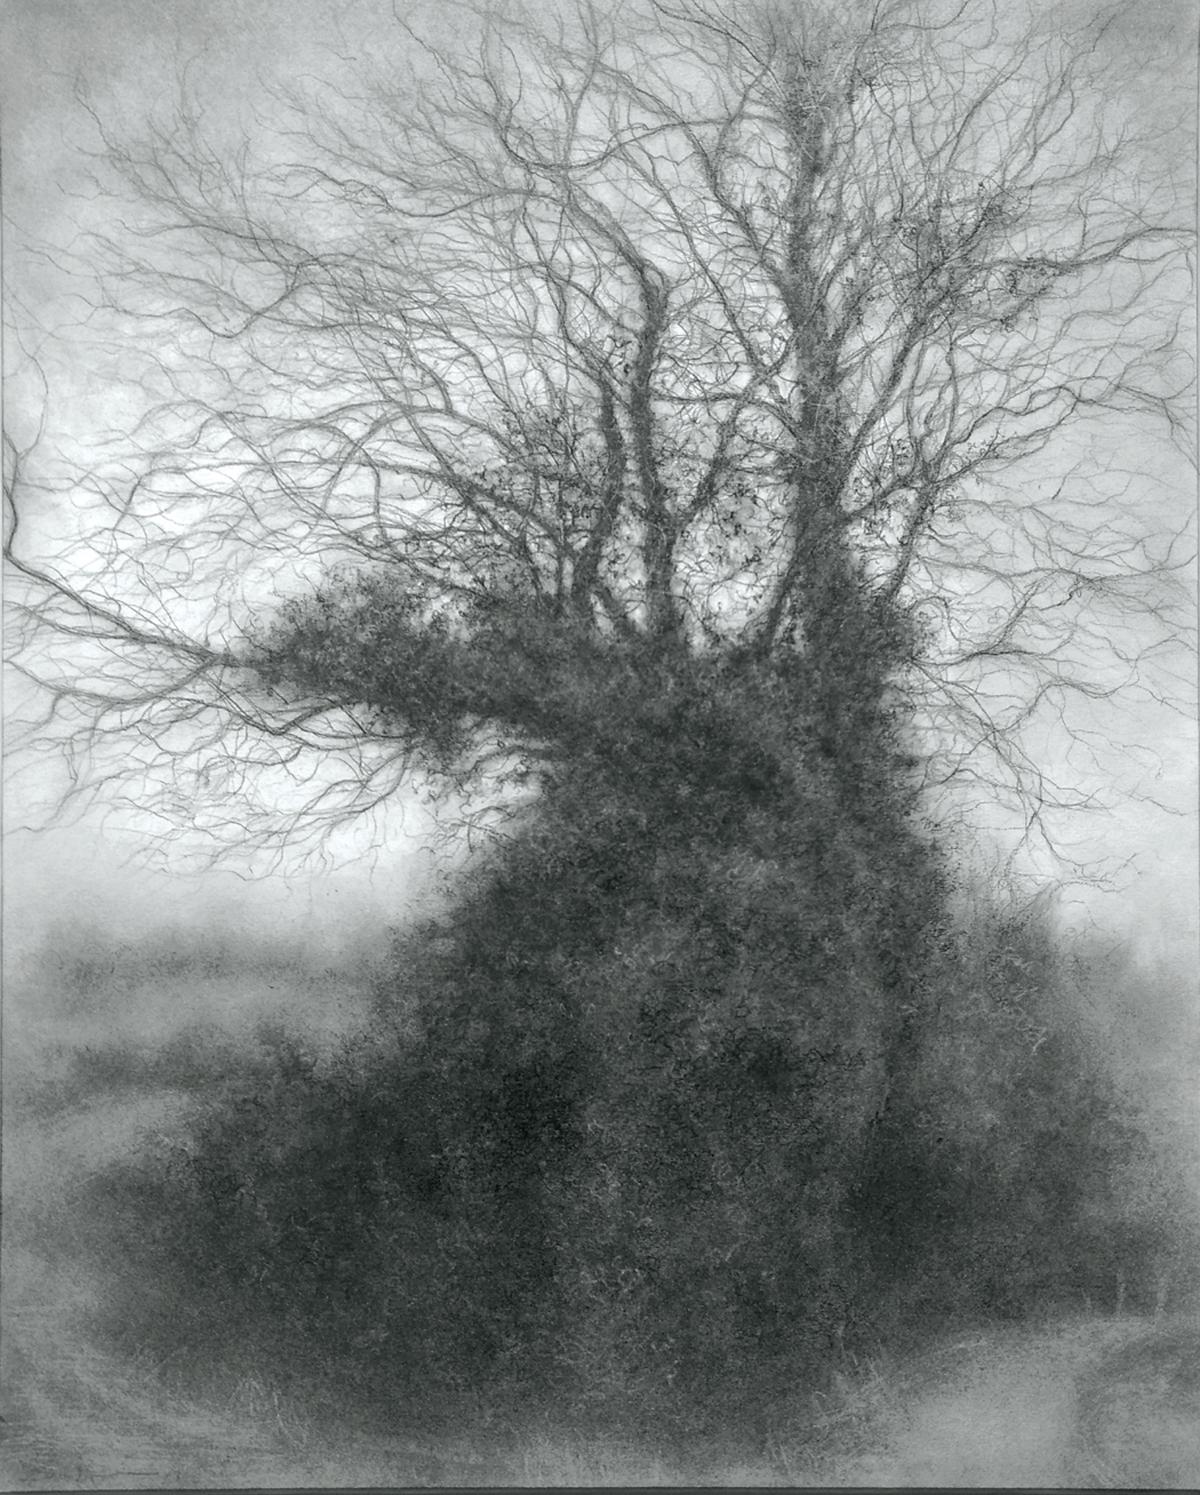 Rural Road 8 (Realistic Charcoal Landscape of a Tree on a Country Road, Framed)